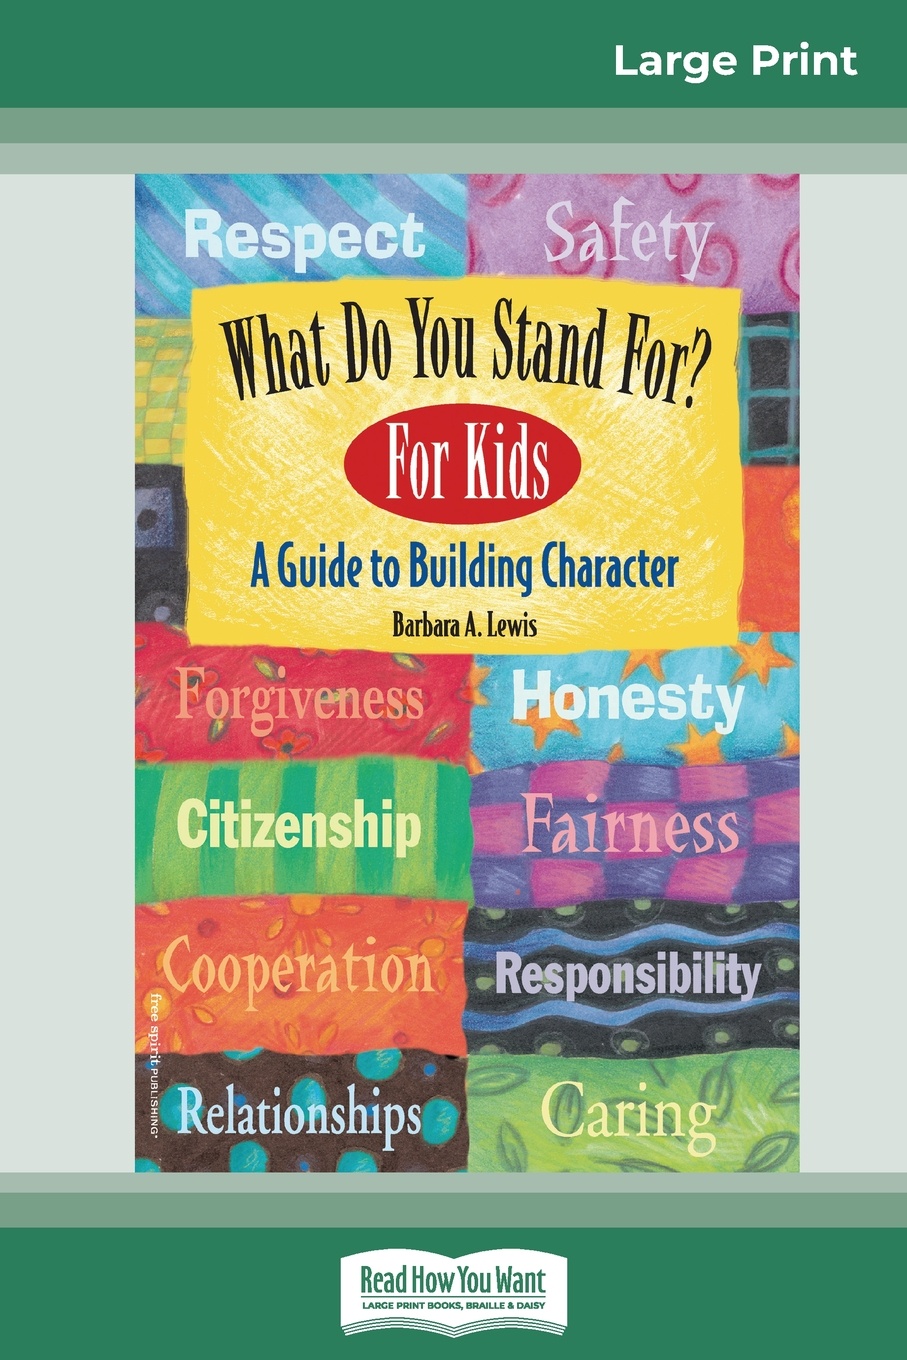 What Do You Stand For? For Kids. A Guide to Building Character (16pt Large Print Edition)